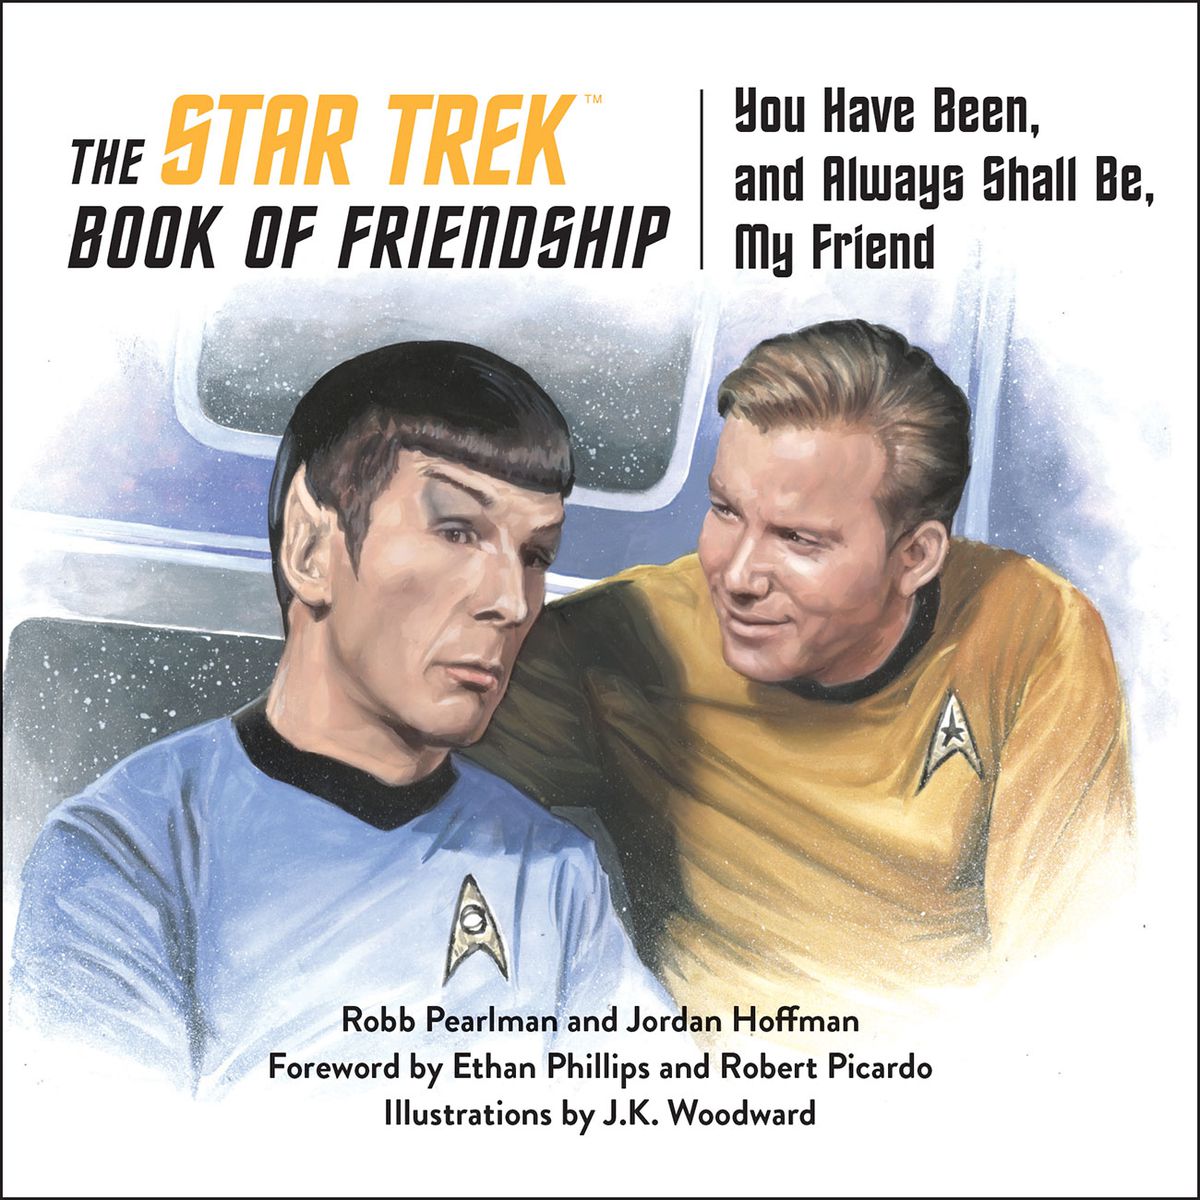 A picture of Captain Kirk grinning at a skeptical Mr. Spock on the cover of The Star Trek Book of Friendship.